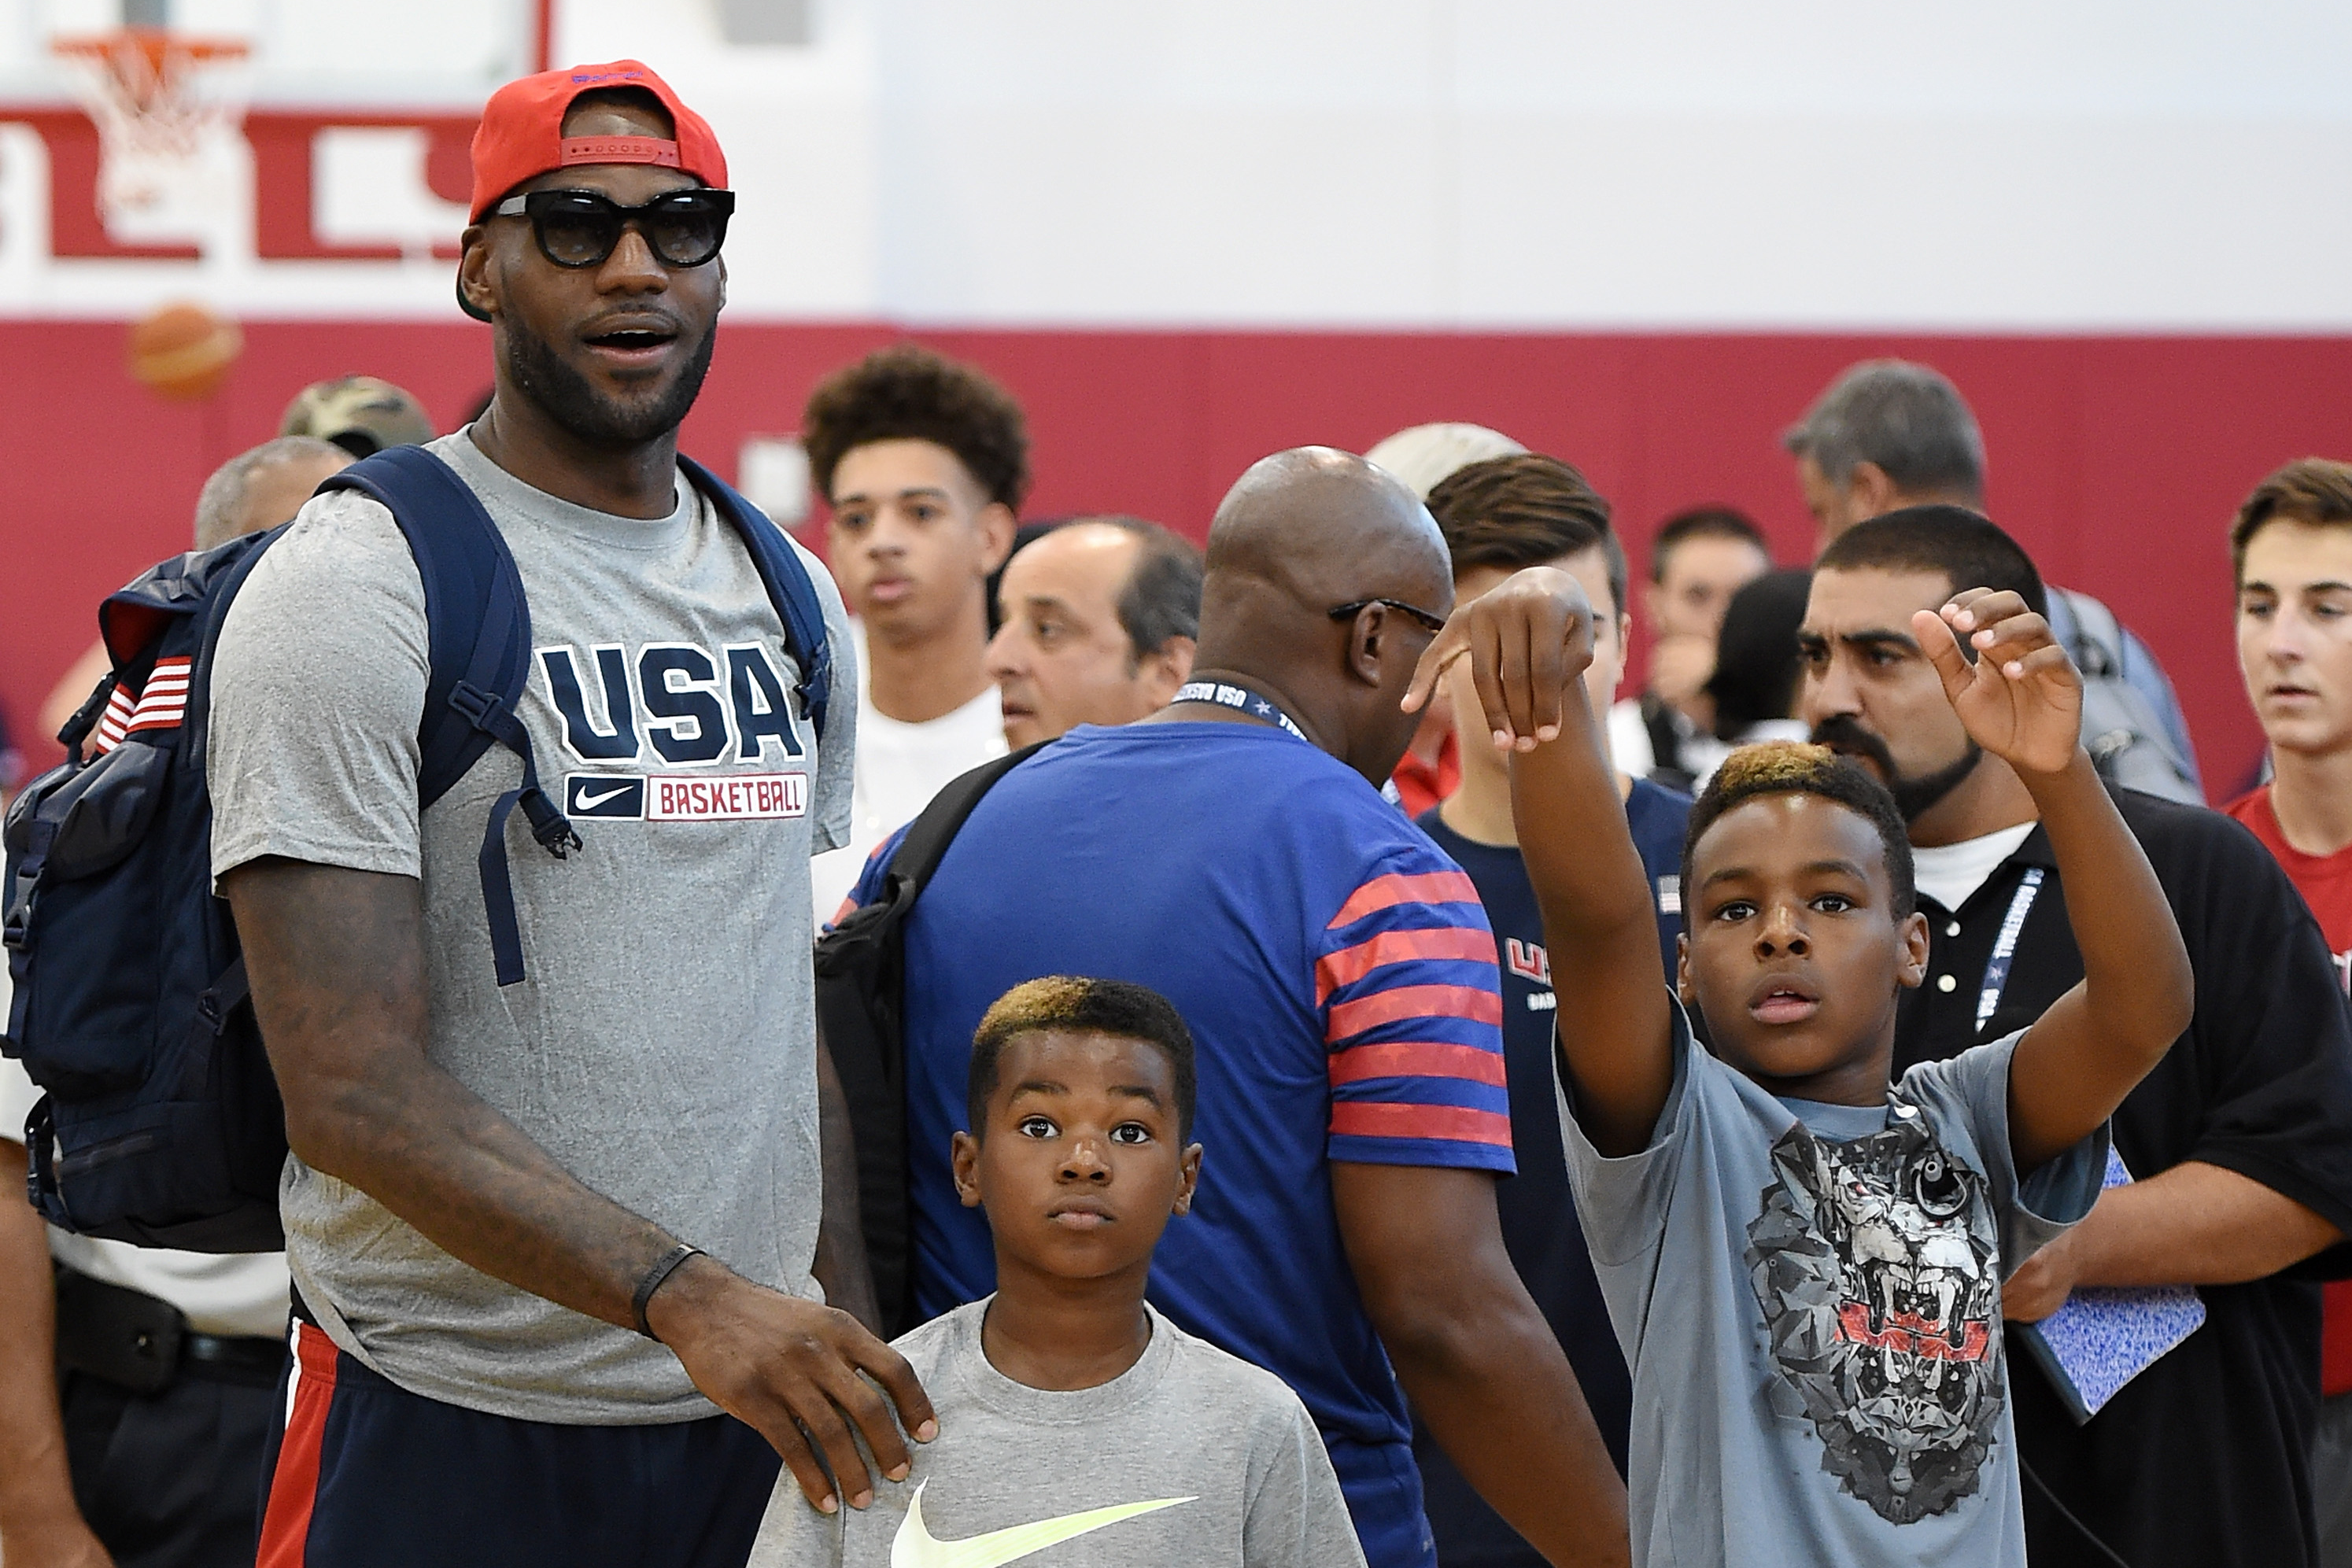 LeBron James Has 3 Kids: Meet 2 Sons and 1 Daughter